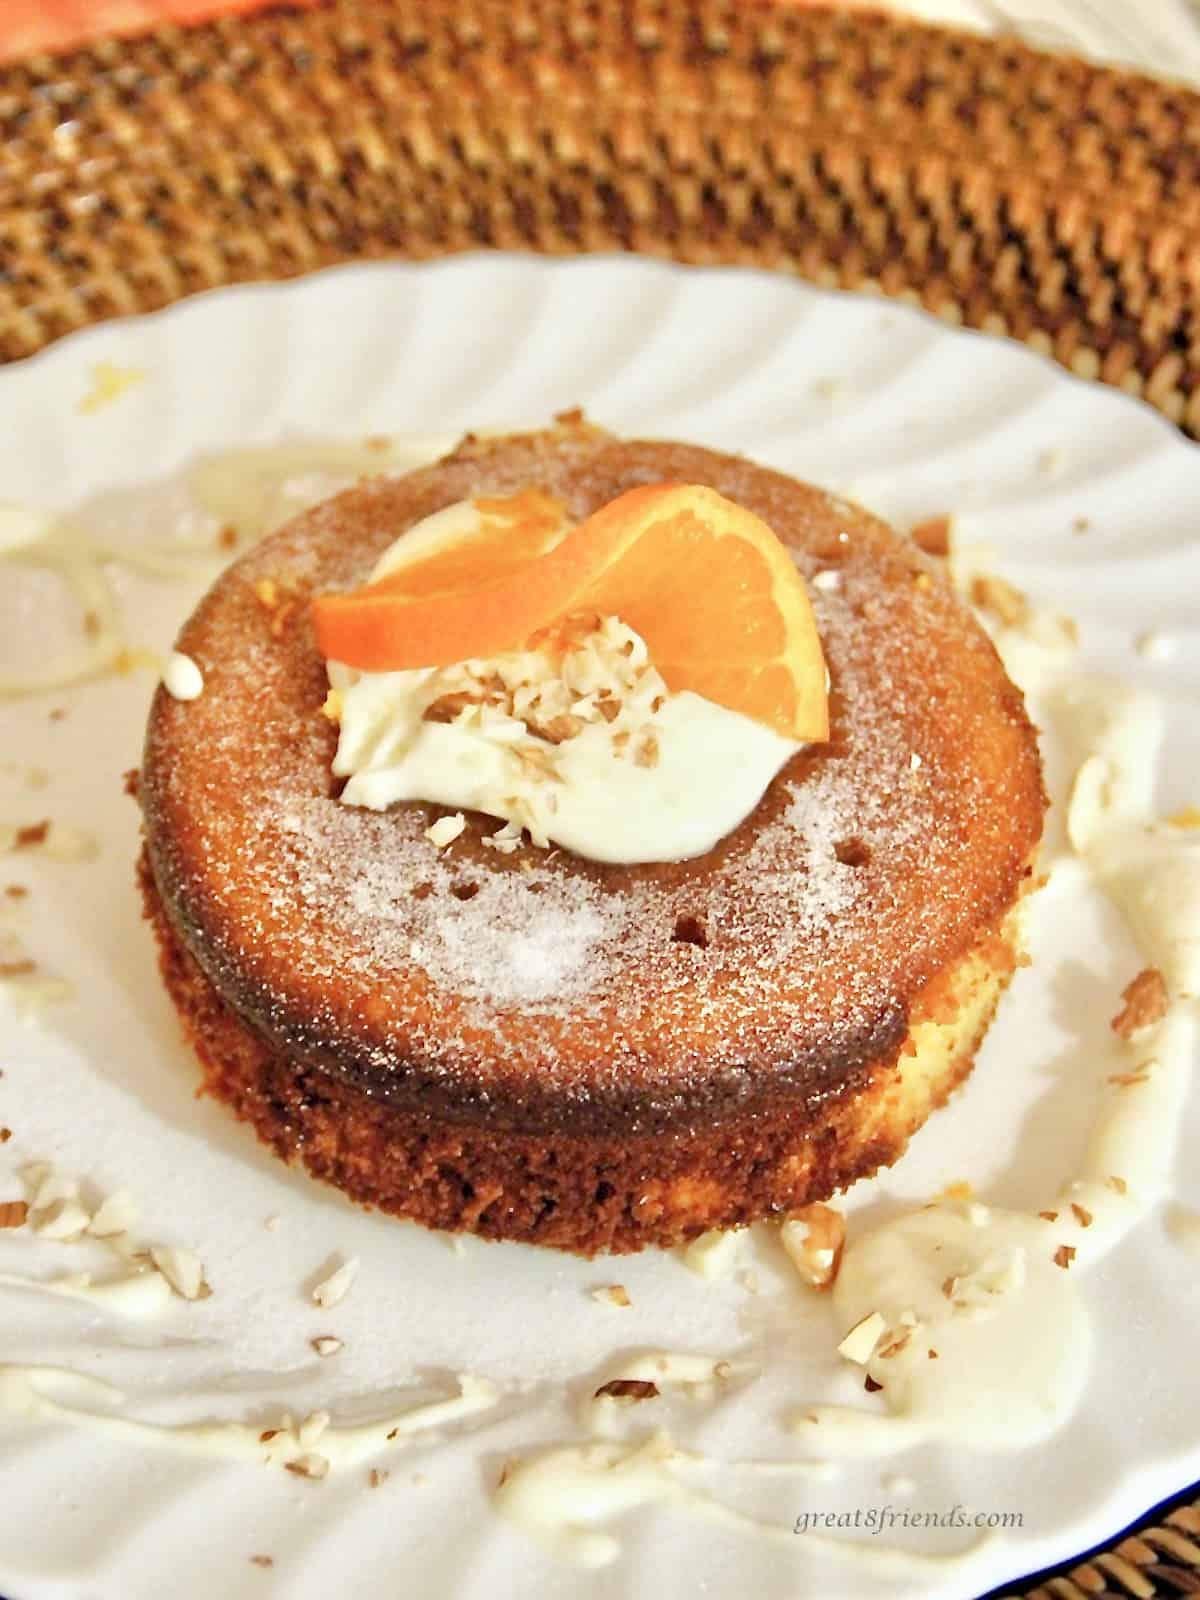 A round cake in the middle of a white plate with whipped cream and an orange slice on top.